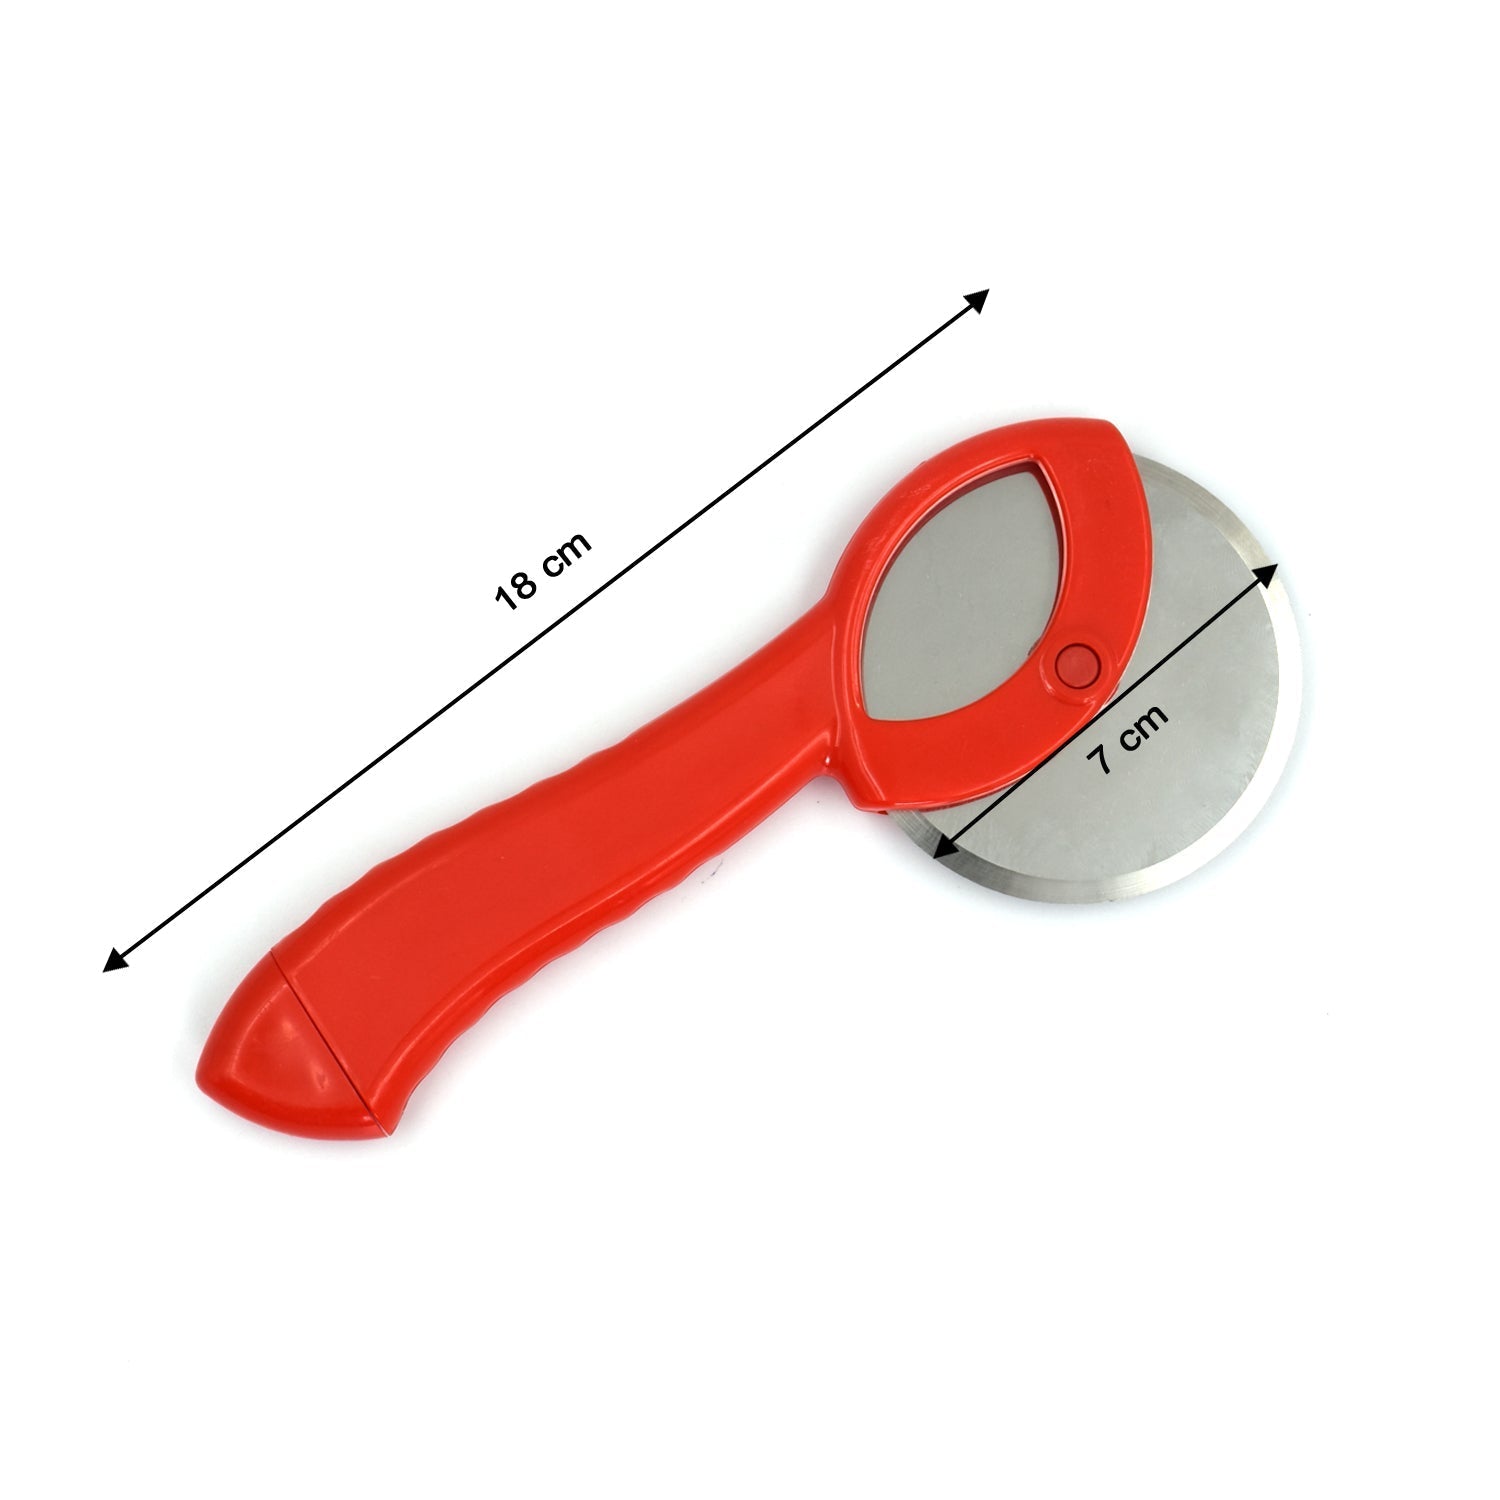 0898 Pizza Handled Cutter Used for Cutting Pizza Into Types Of Pieces Easily. freeshipping - DeoDap